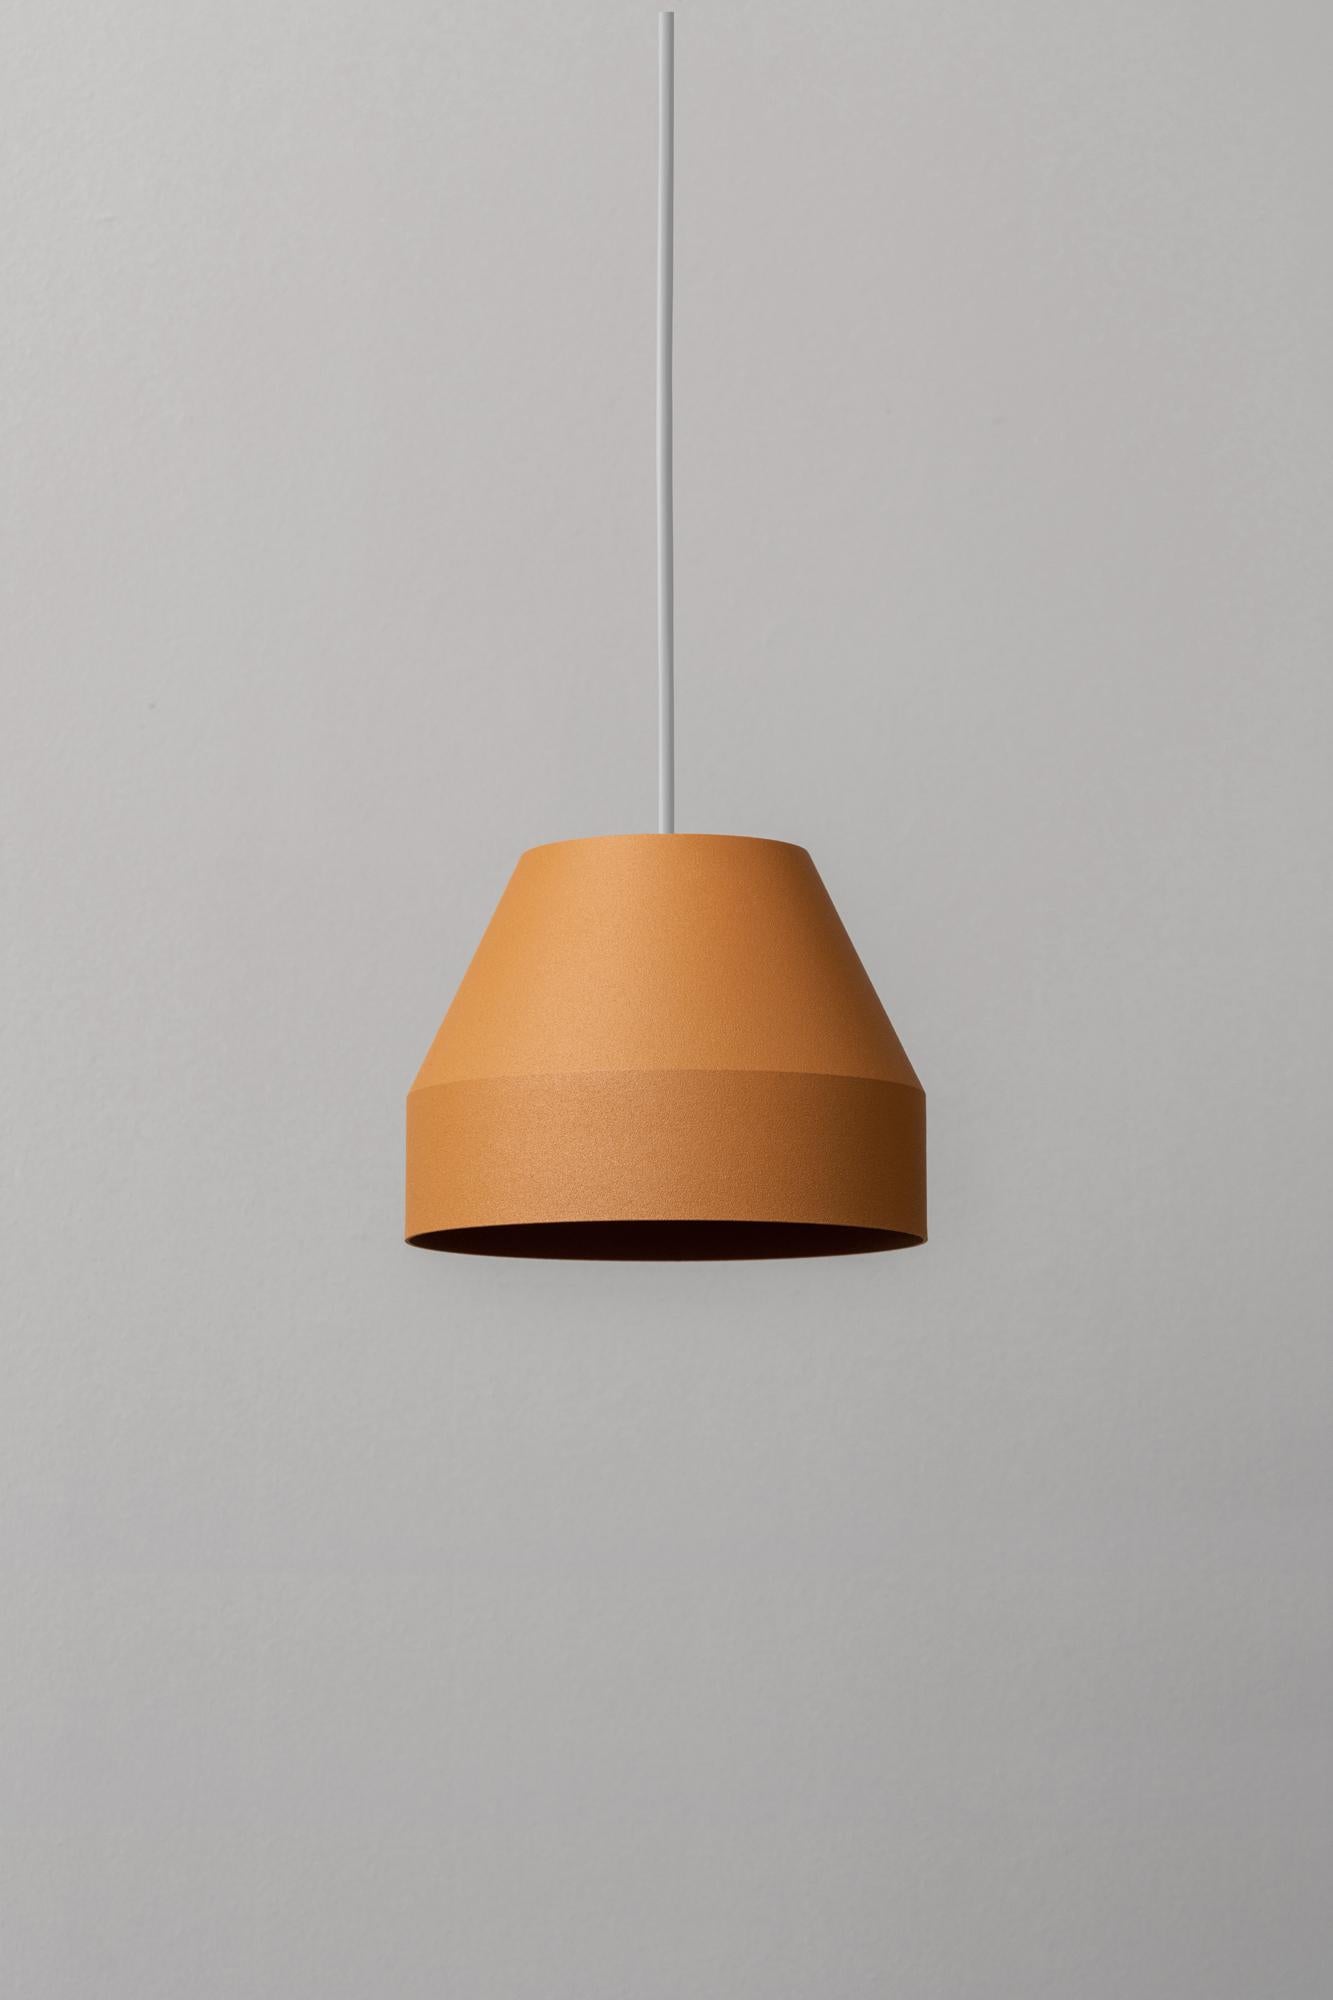 Small Almond Cap Pendant Lamp by +kouple
Dimensions: Ø 16 x H 12 cm. 
Materials: Powder-coated steel.

Available in different color options. The rod length is 200 cm. Please contact us.

All our lamps can be wired according to each country. If sold